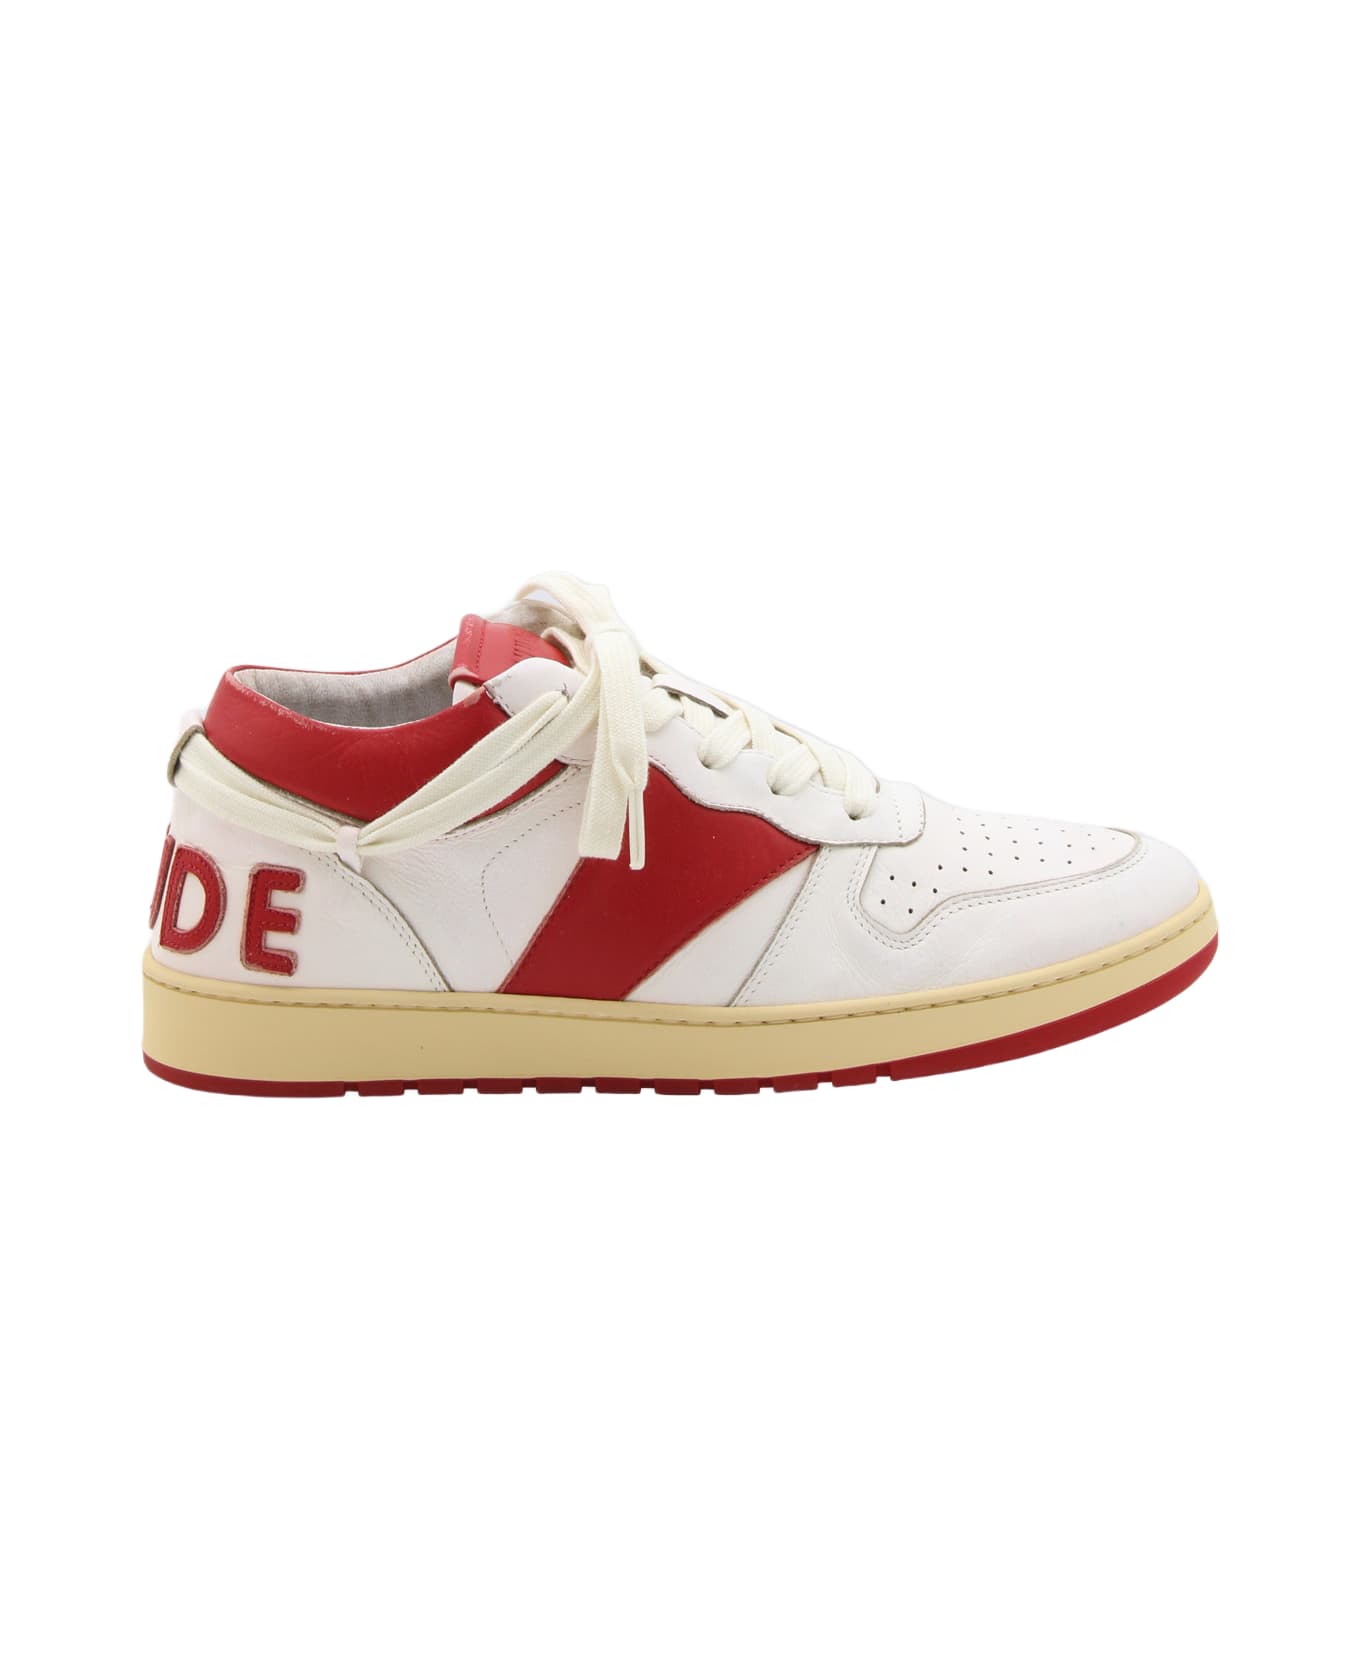 Rhude White And Red Leather Sneakers - White